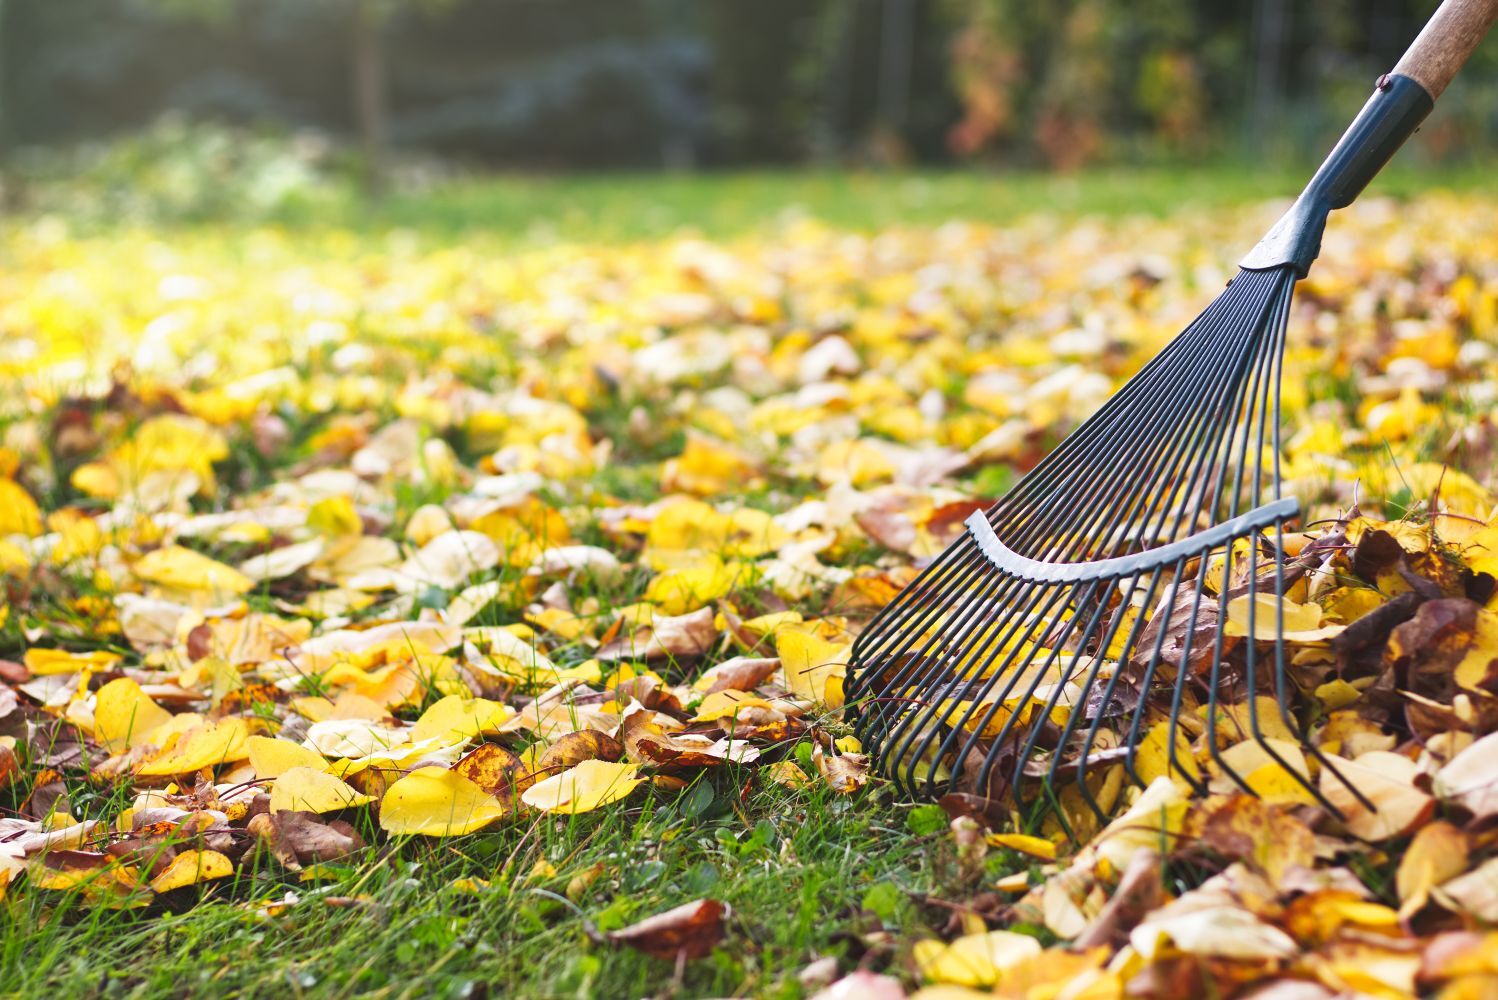 What to do with fallen leaves on the lawn - Plantura